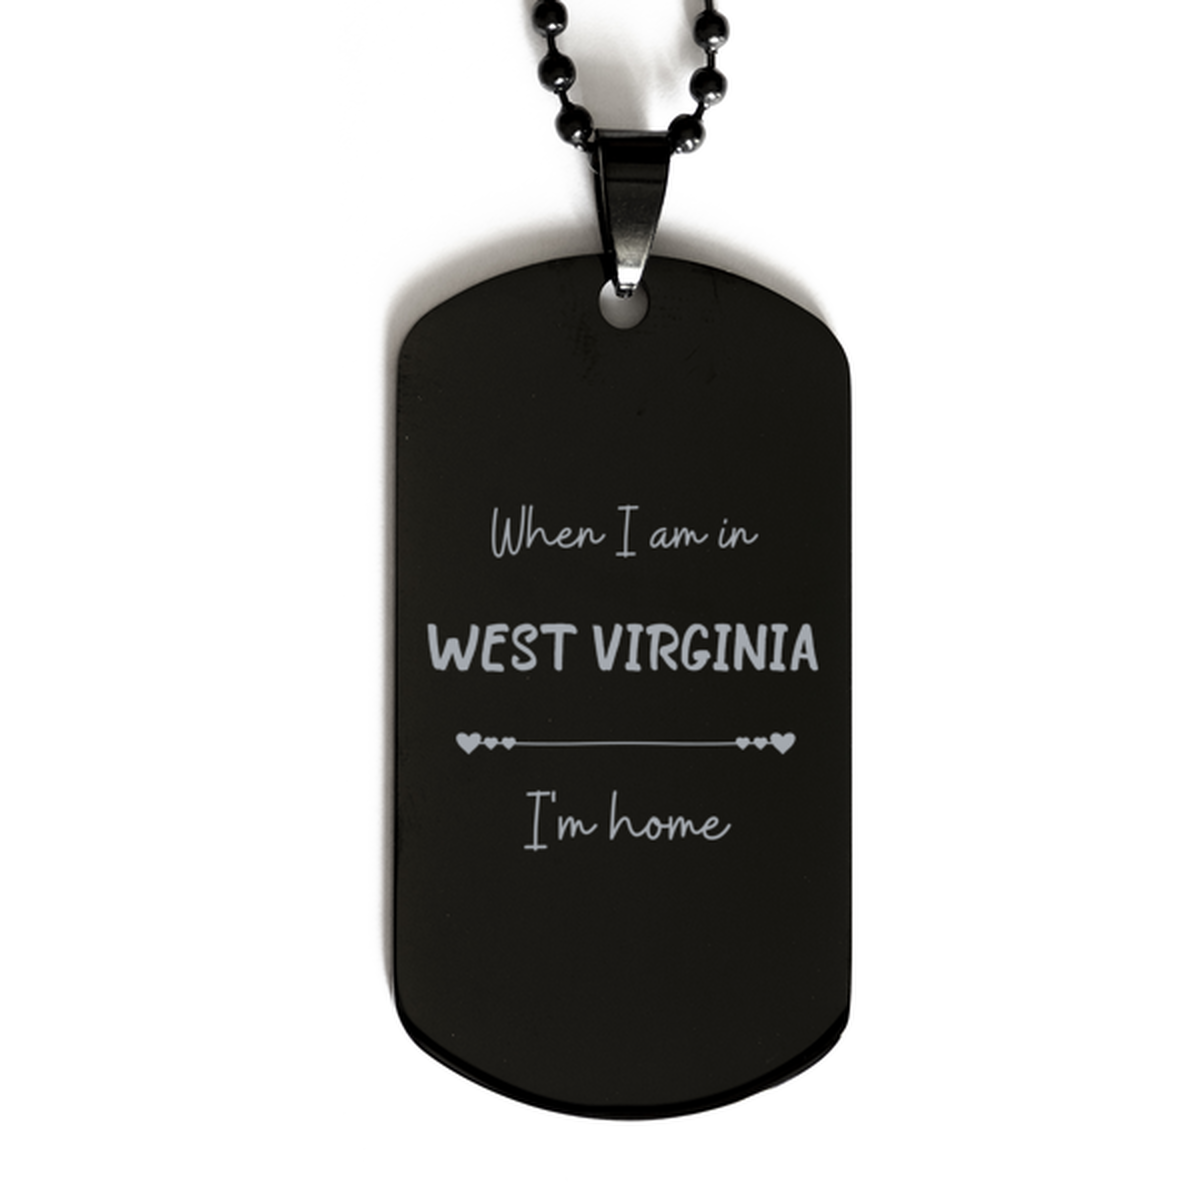 When I am in West Virginia I'm home Black Dog Tag, Cheap Gifts For West Virginia, State West Virginia Birthday Gifts for Friends Coworker